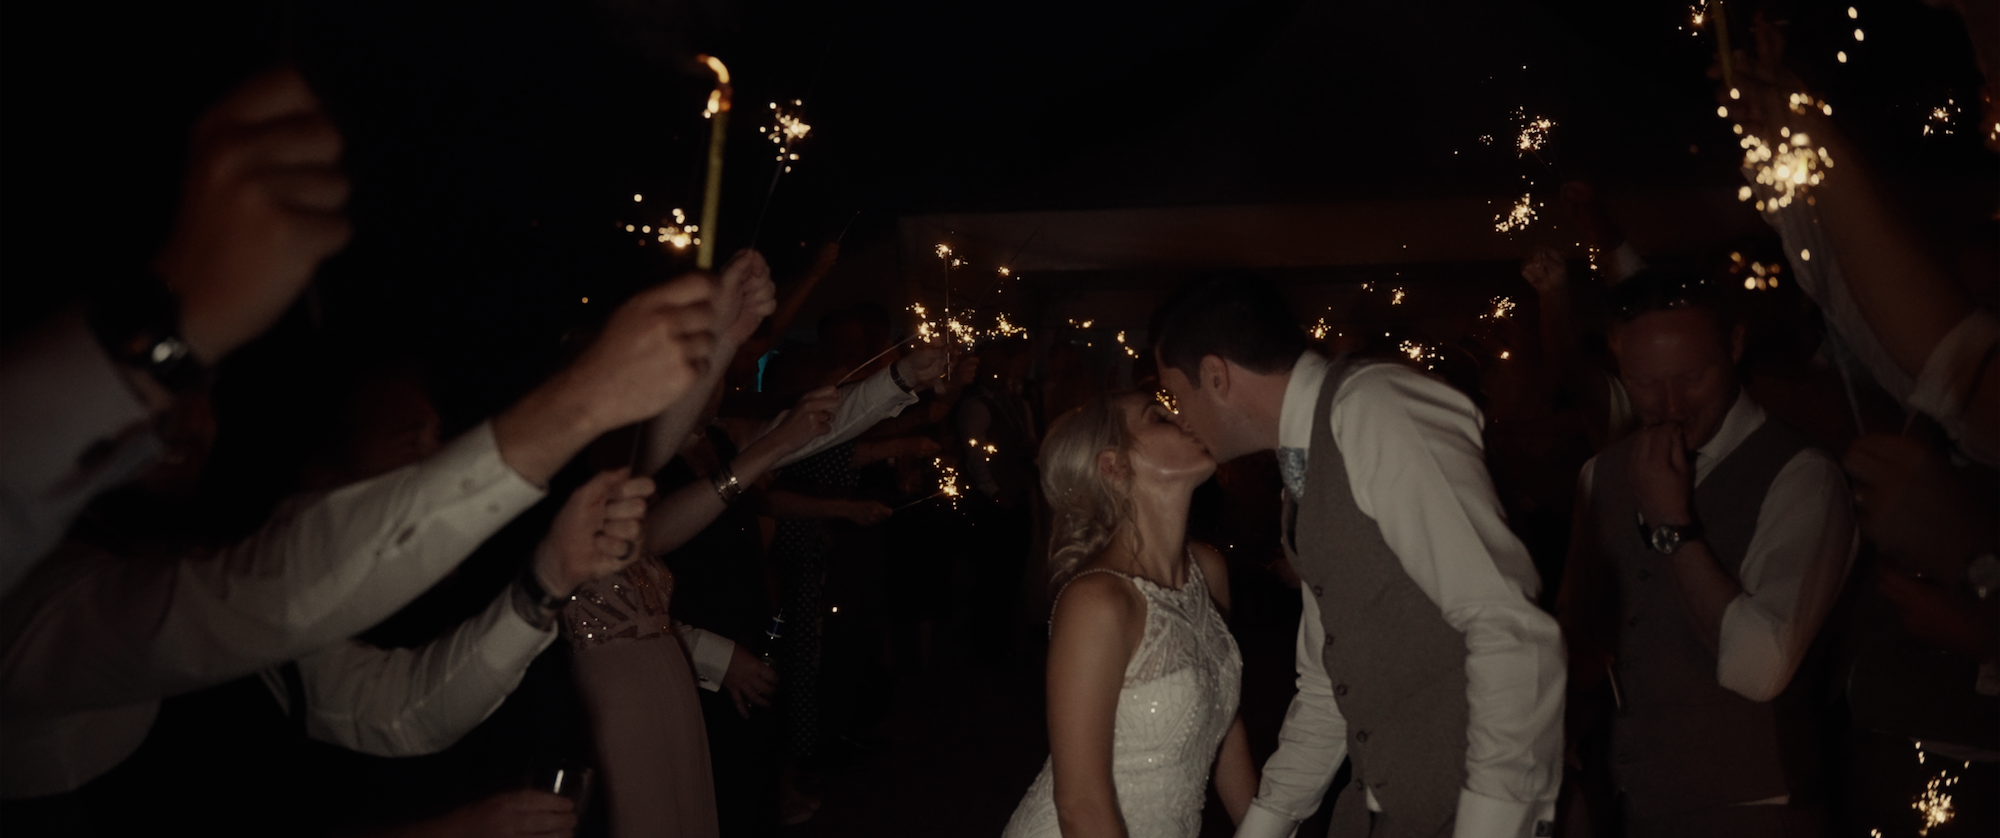 Oxwich Bay Hotel Wedding Videography by Ben Holbrook Films (Swansea South Wales).jpeg43.png